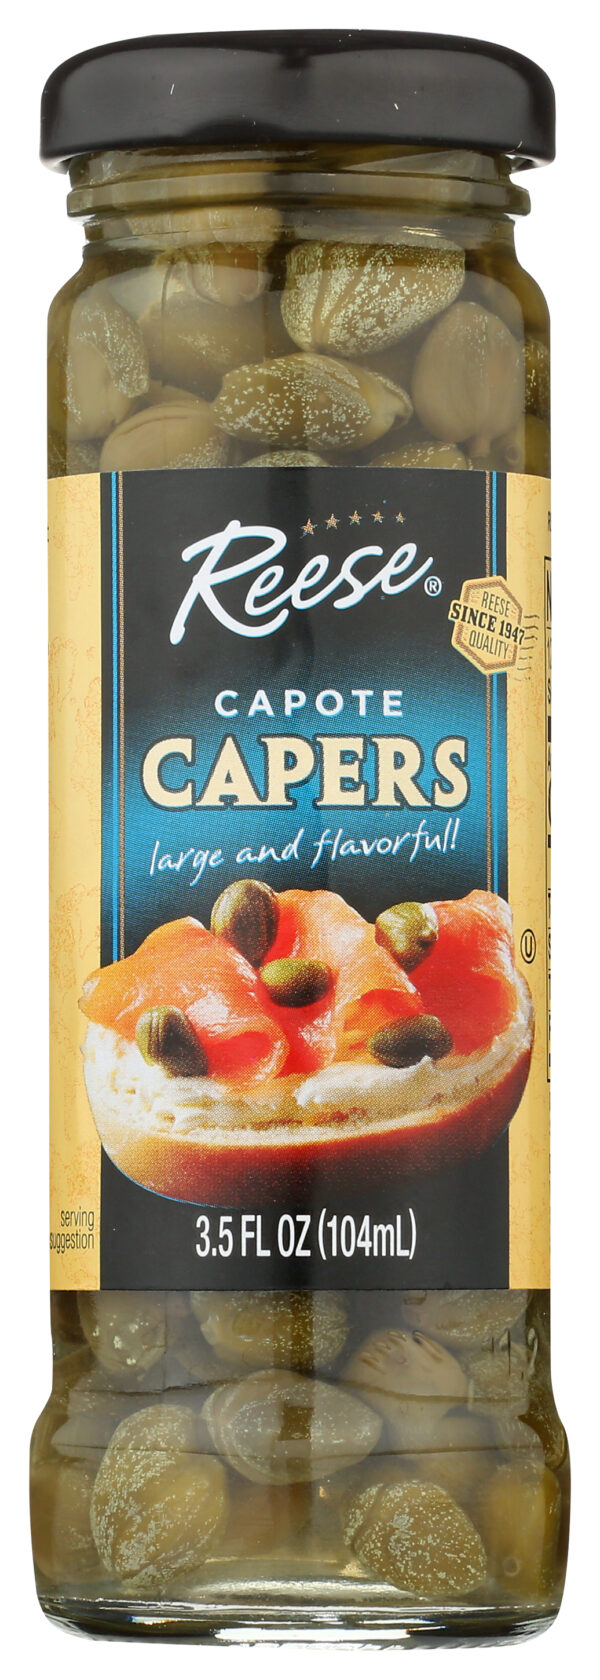 Capote Capers